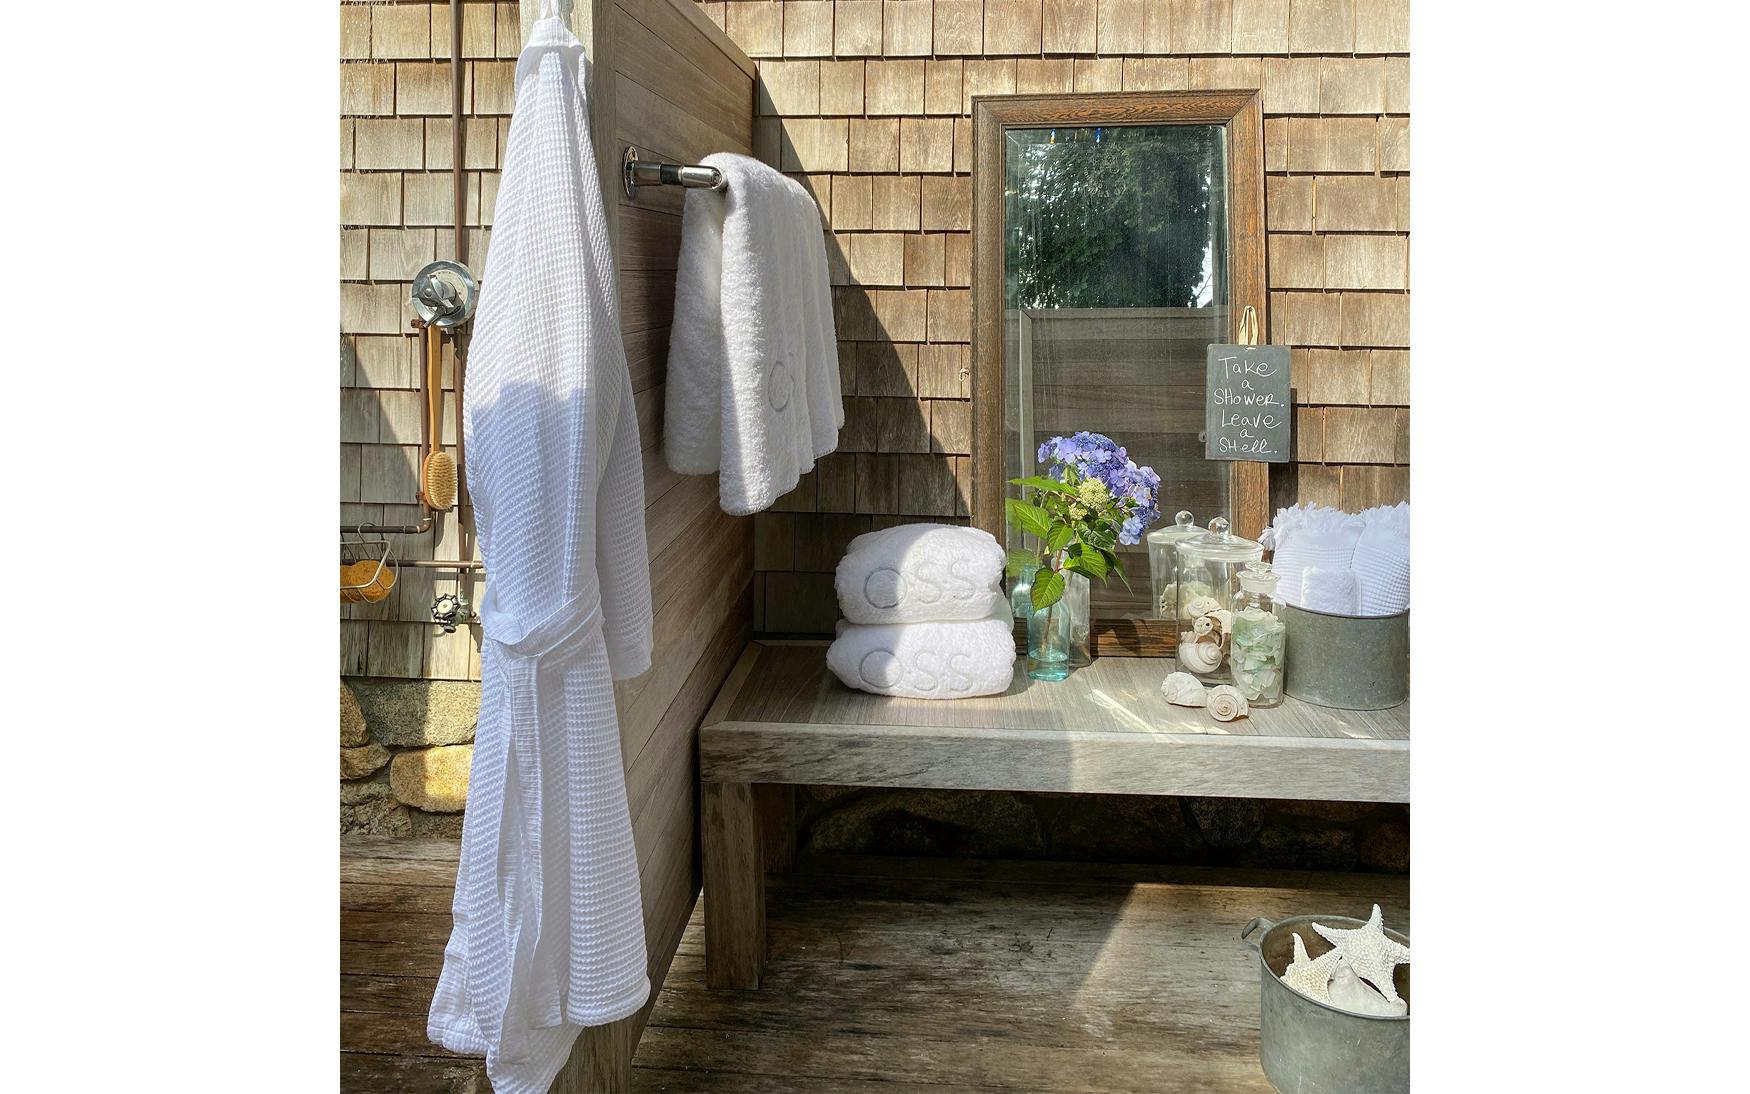 Bedded Bliss offers Whipstitch by Matouk, luxury bath towels in Louisville,  KY